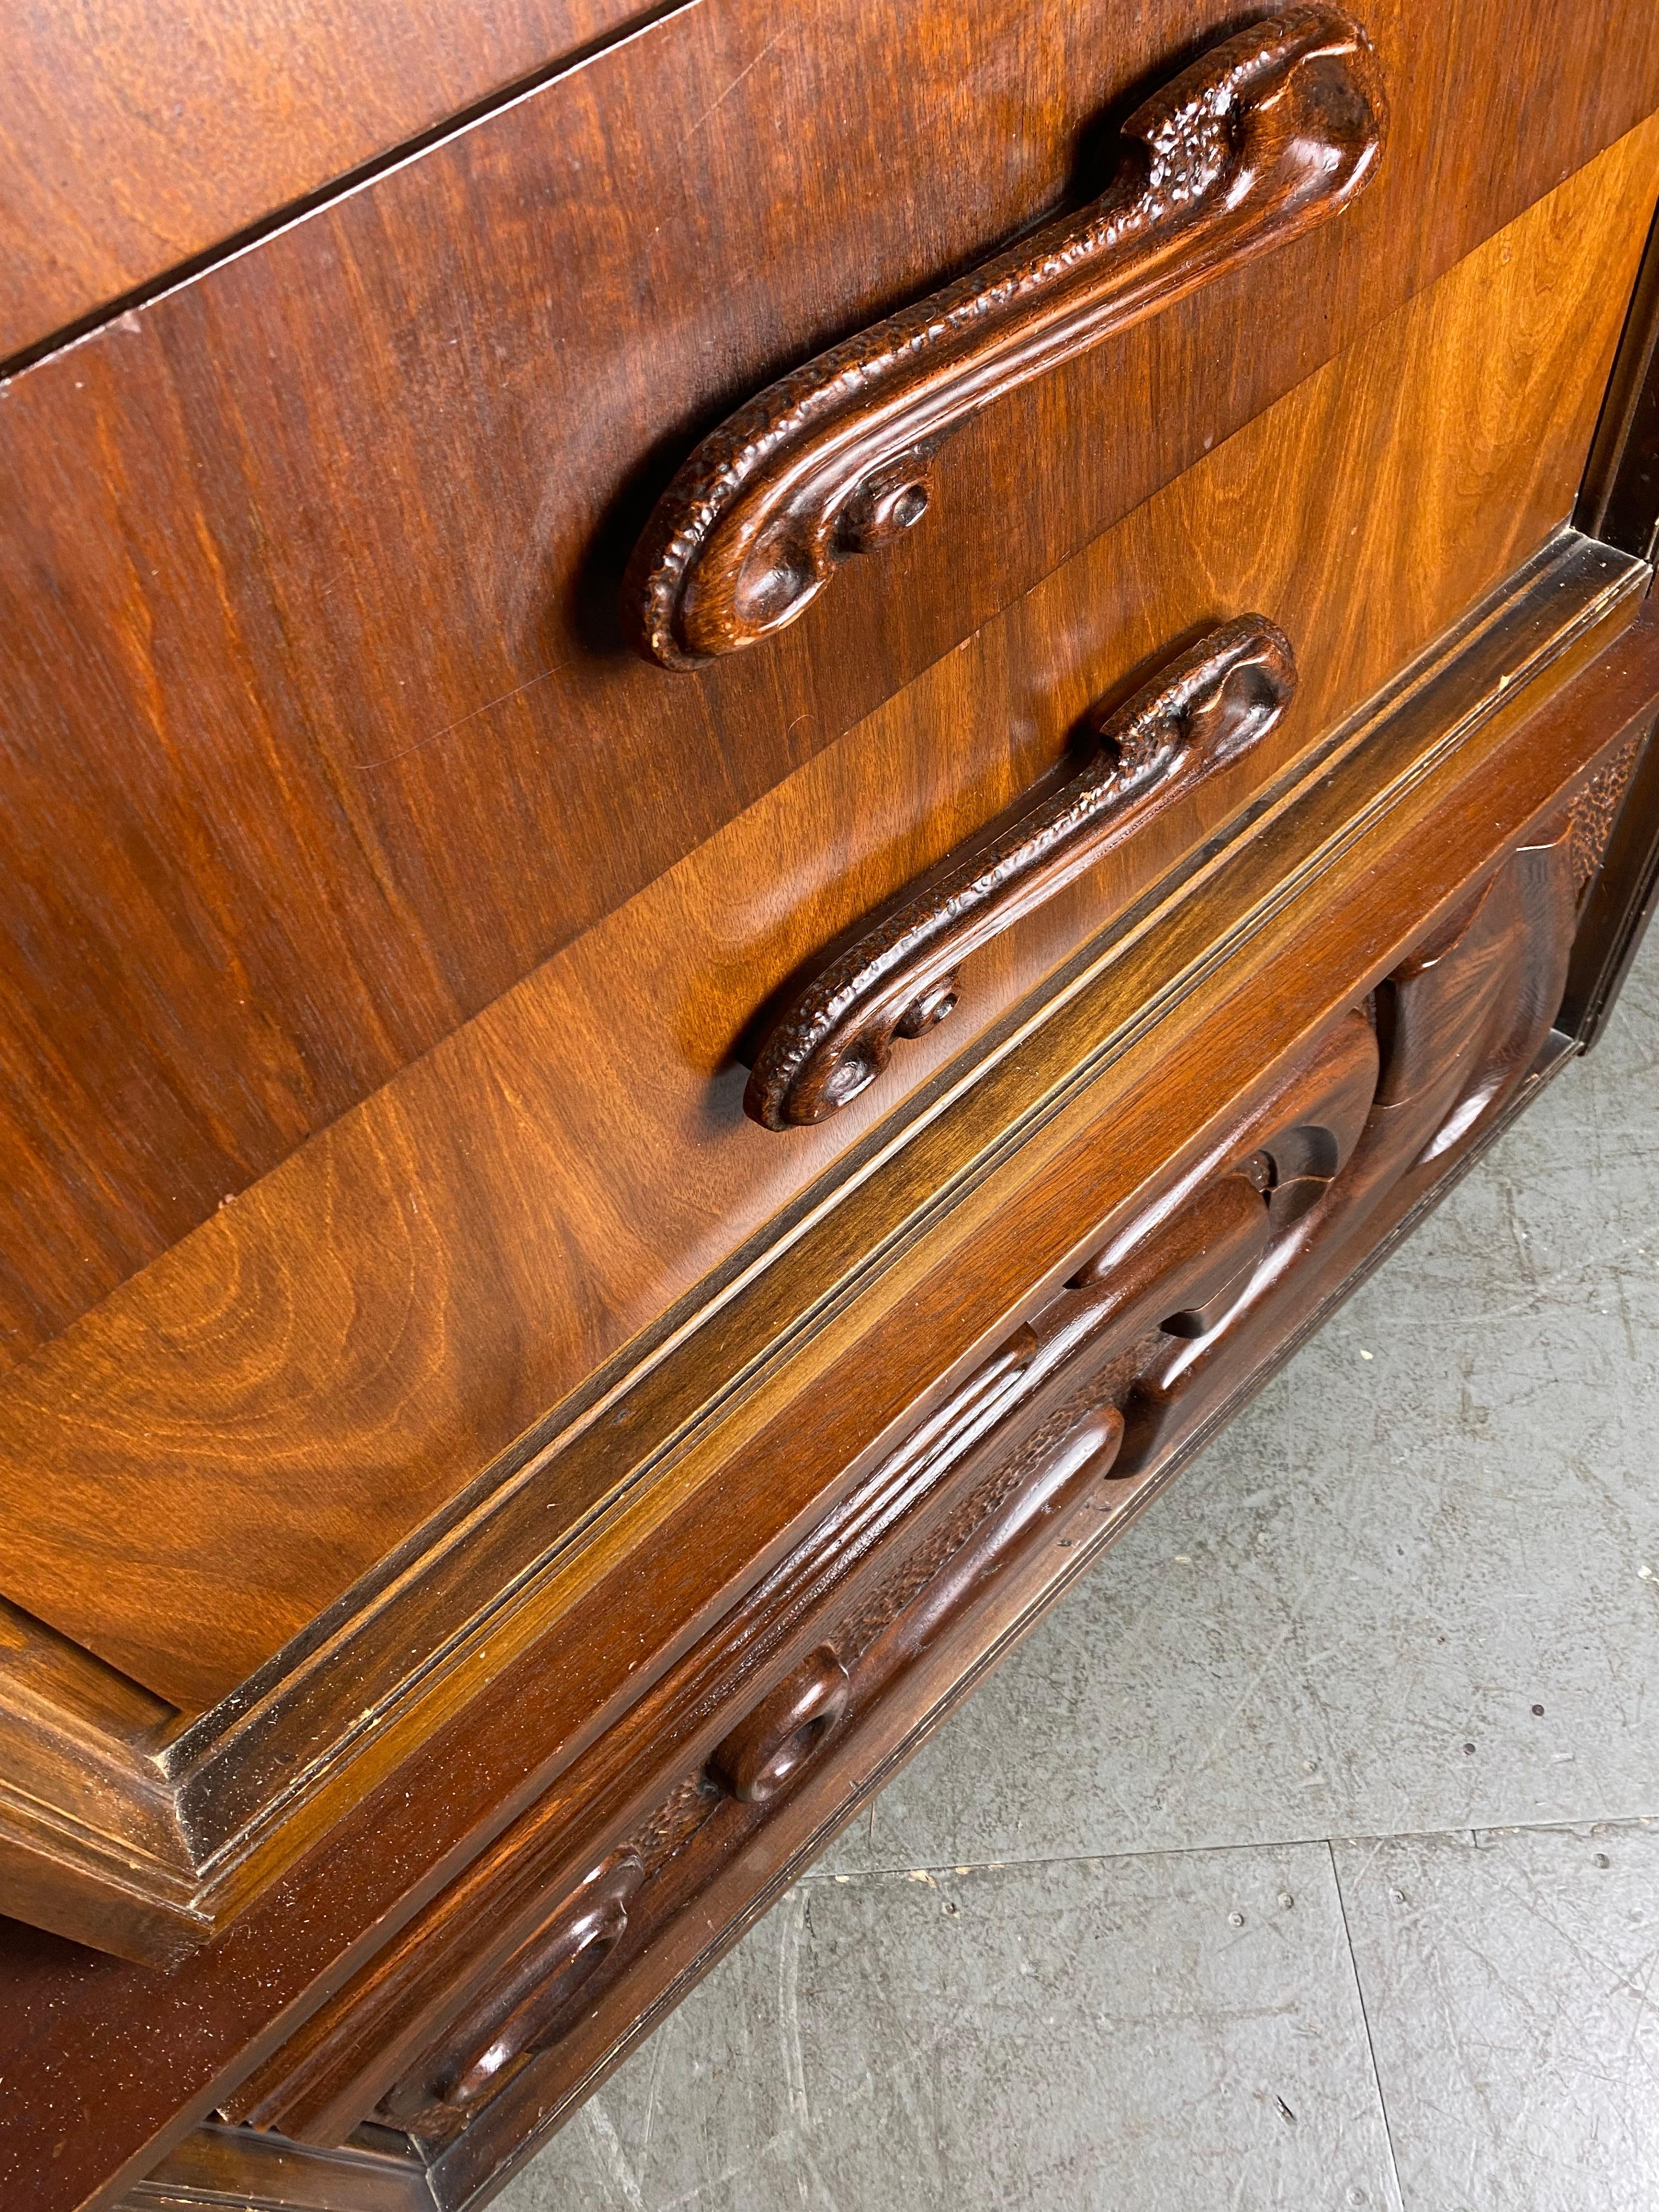 This lovely rare oceanic contour highboy gentlemen’s dresser is by Pulaski Furniture Co is often attributed to Witco. The credenza of this line by Pulaski Furniture Corporation was featured in Donald Draper's office for multiple seasons on the hit